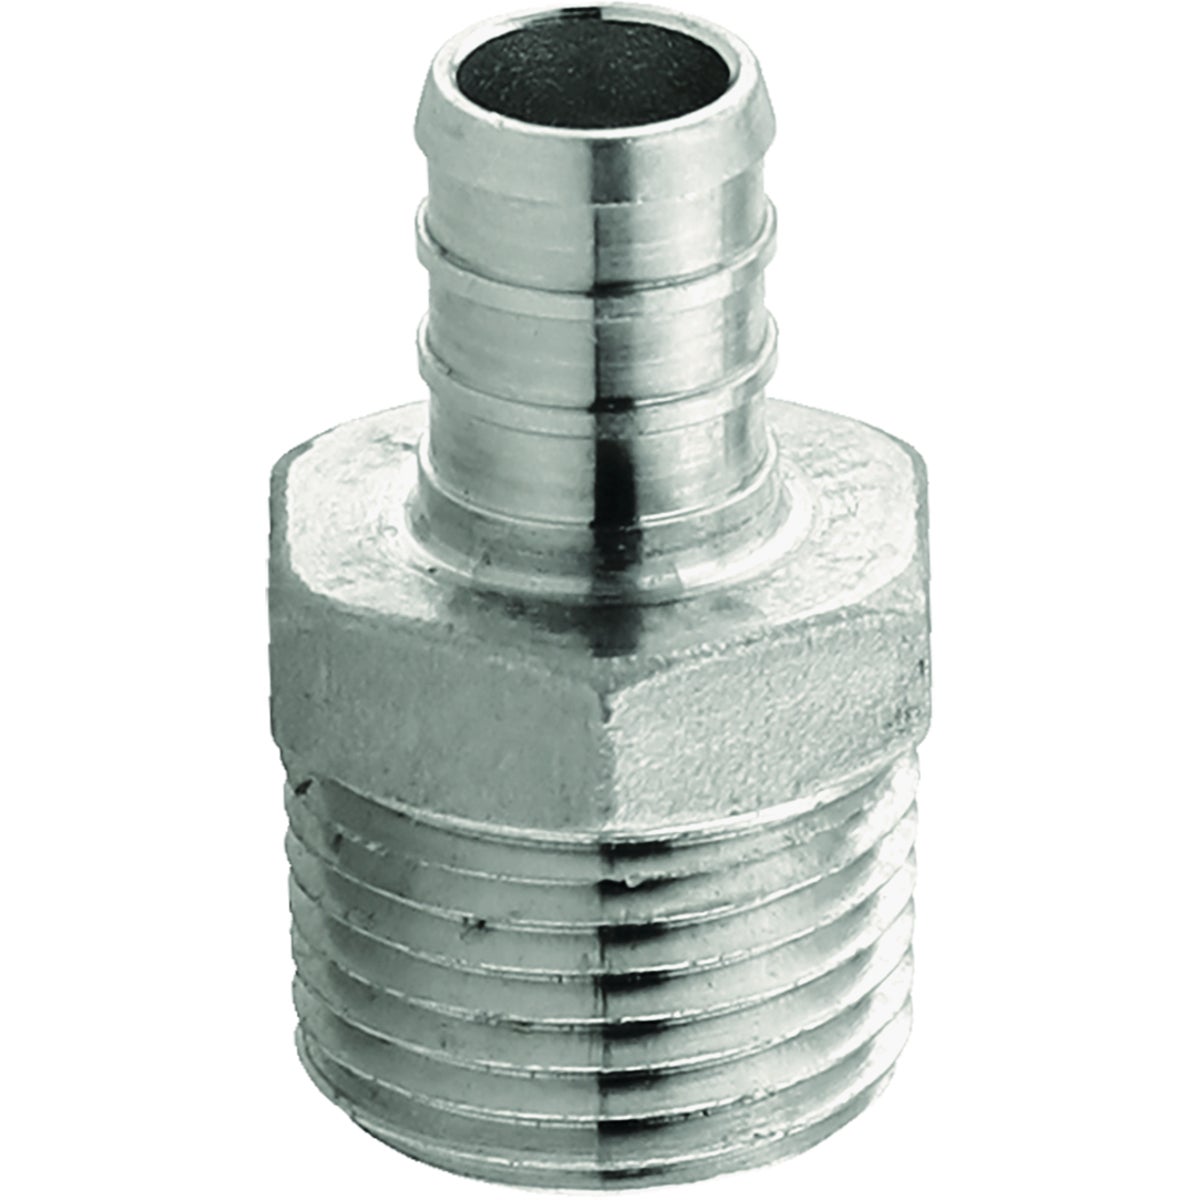 Plumbeez 1/2 In. x 1/2 In. MPT Stainless Steel PEX Adapter